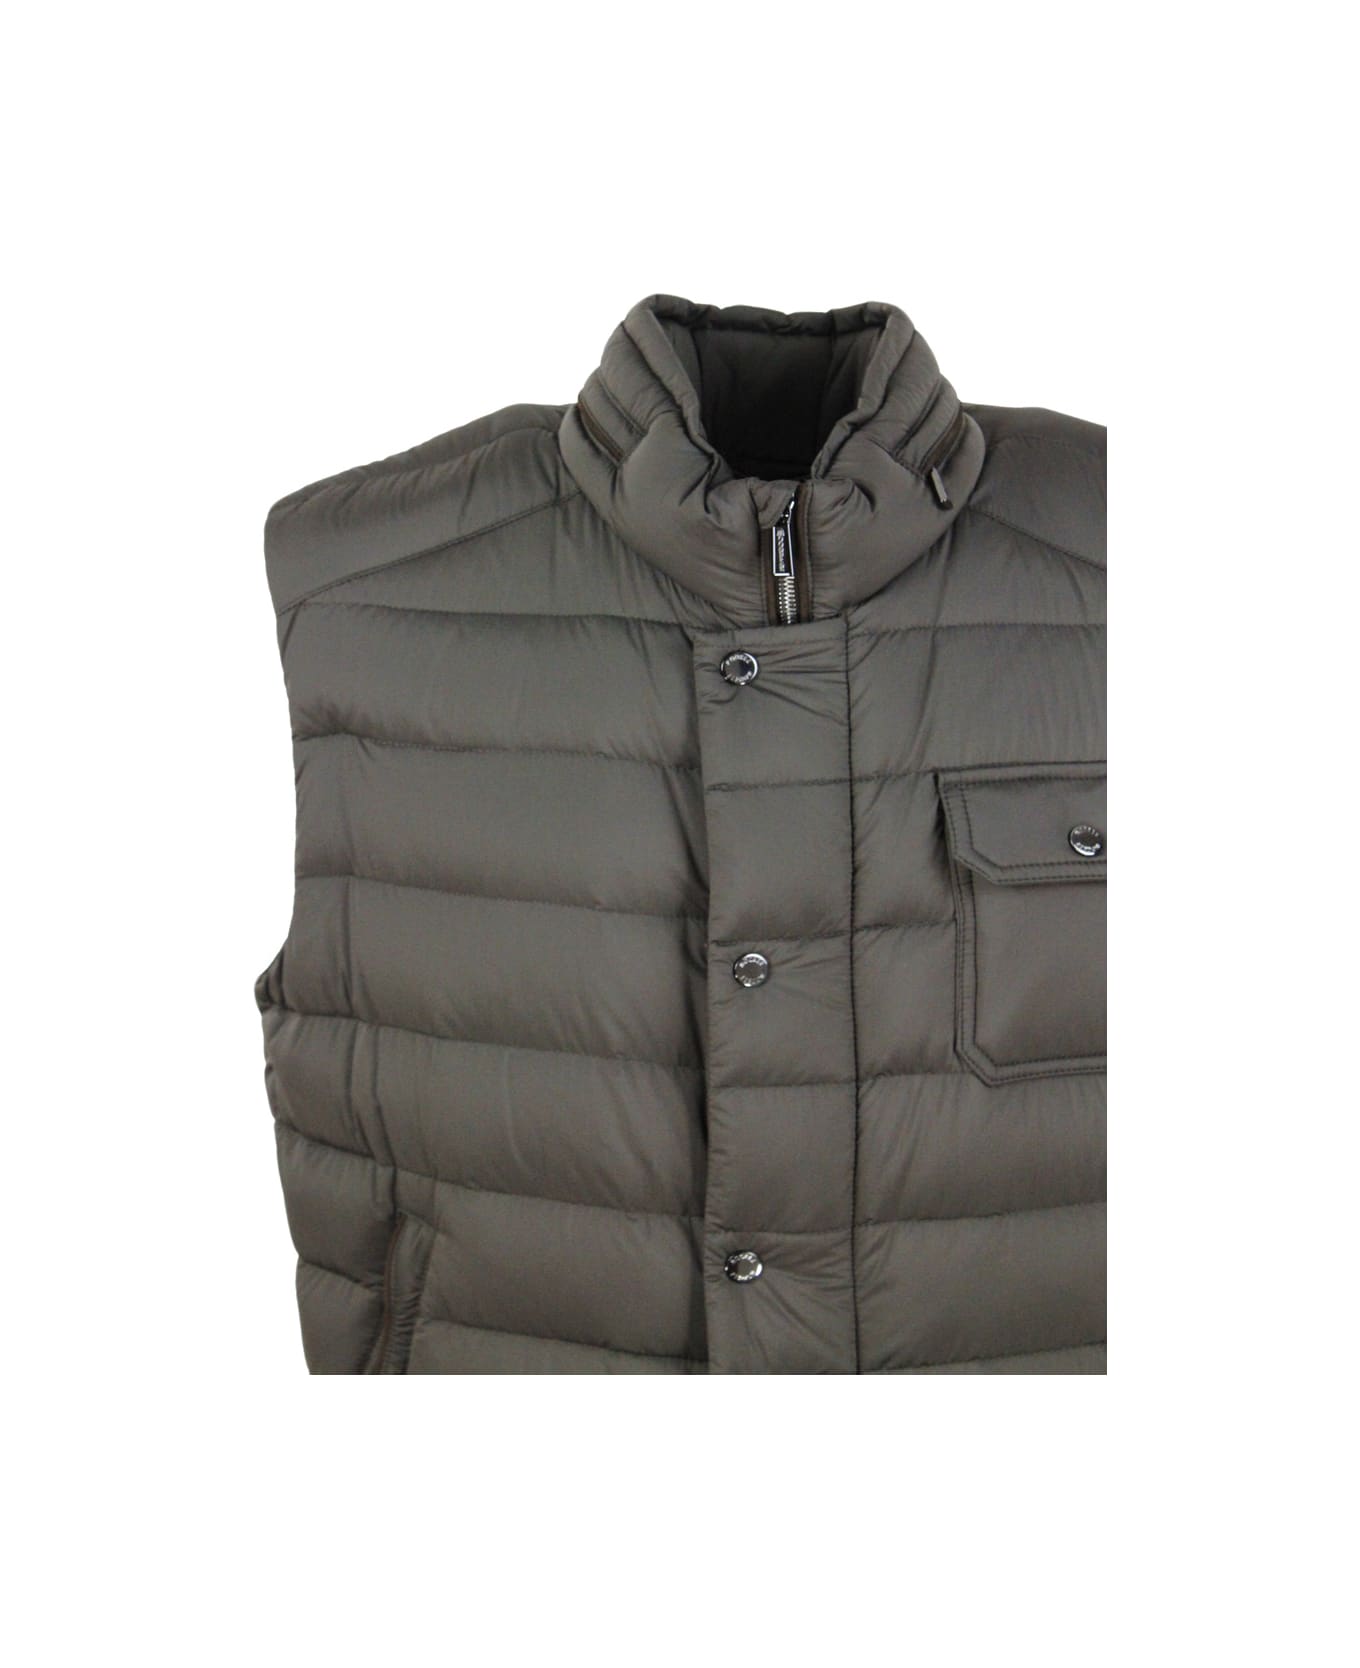 Moorer Sleeveless Vest Padded With Real Goose Down With Concealed Hood And Front Zip And Button Closure - Military